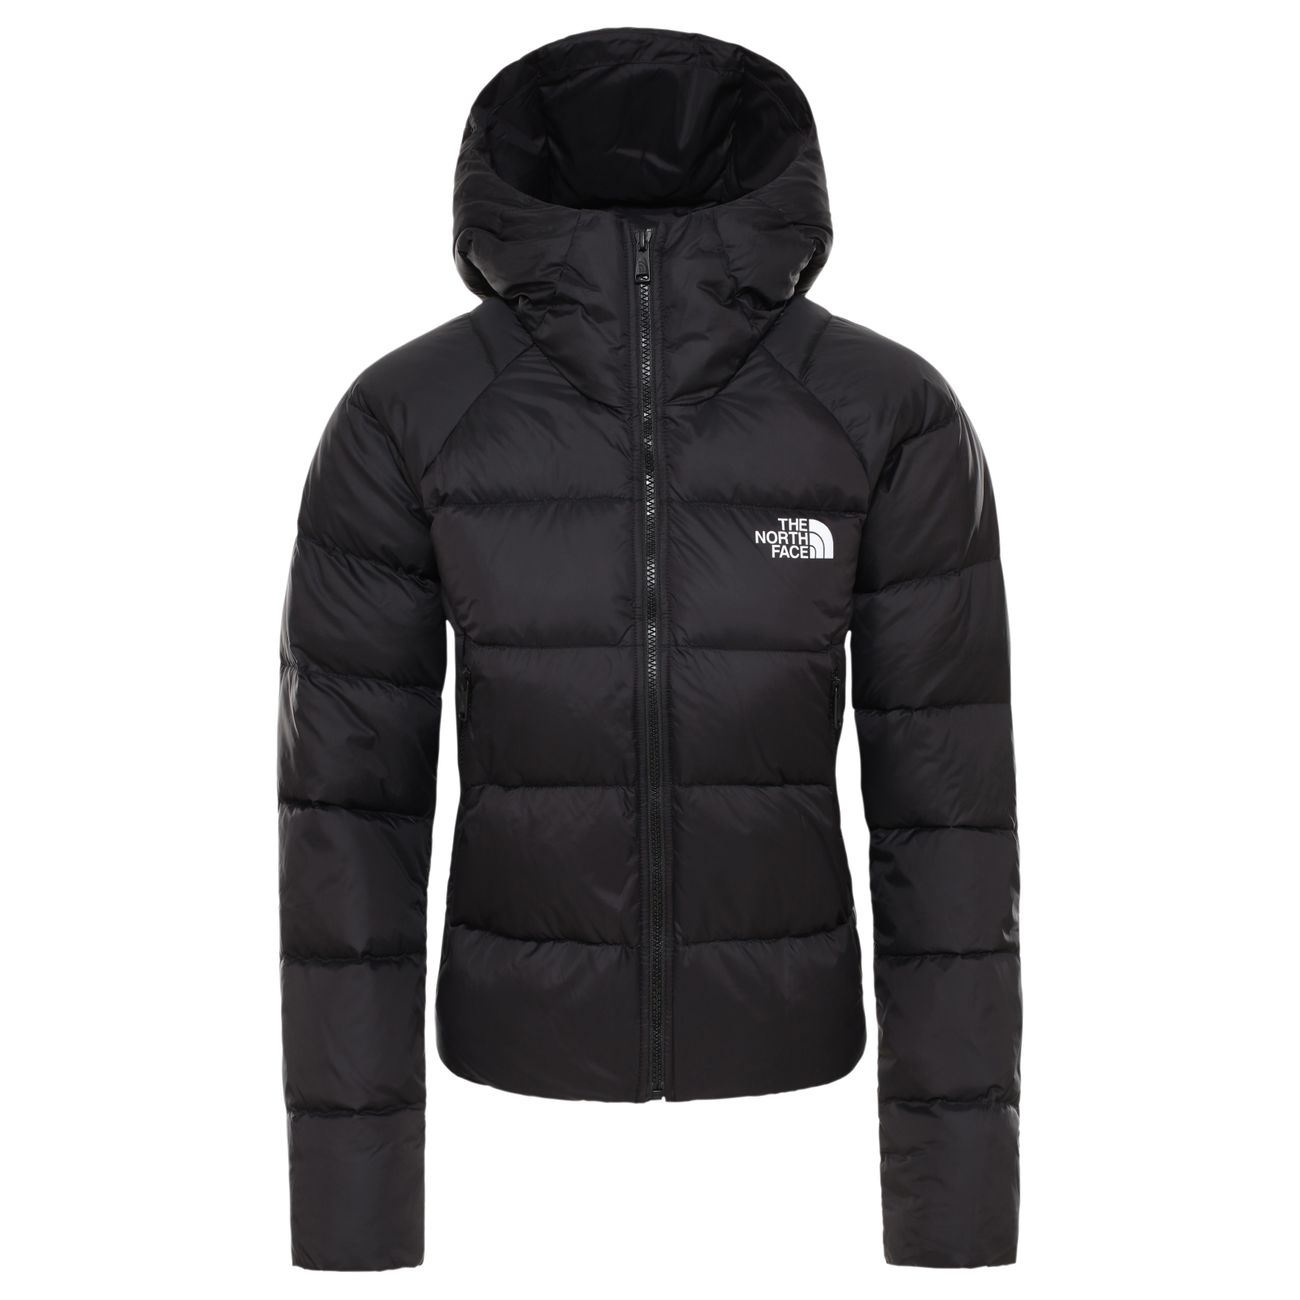 THE NORTH FACE HYALITE DOWN JACKET WITH HOOD Damen Winterjacke - The North Face - SAGATOO - 192827439276